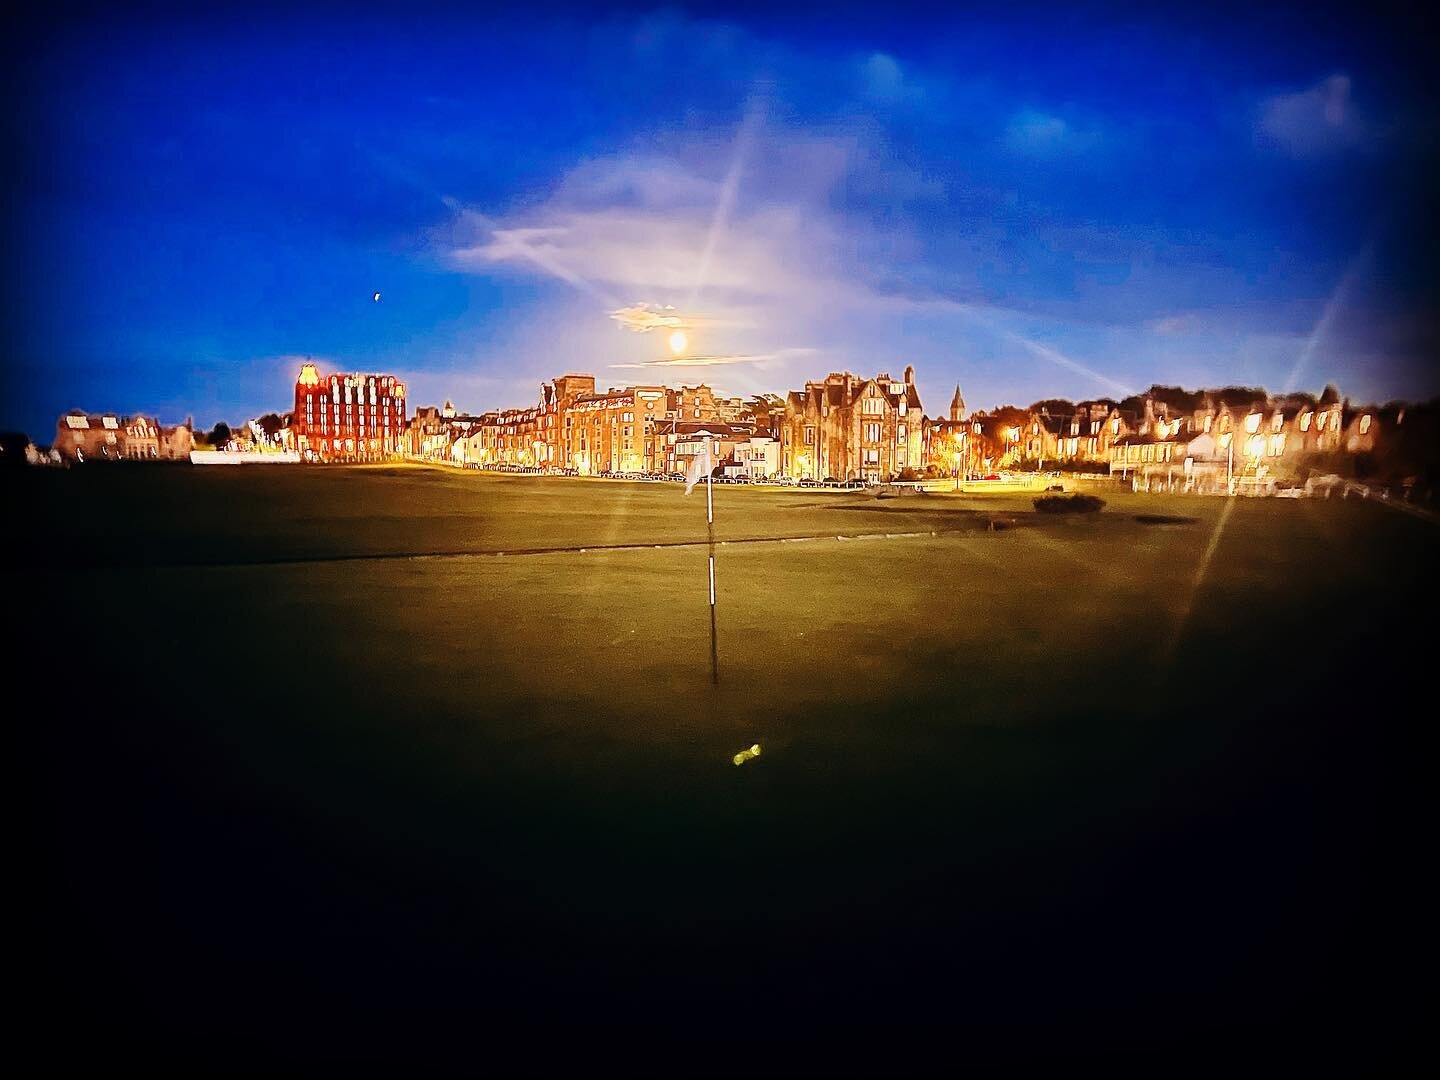 What a stunning night on The Old Course in St Andrews. We would love to help you plan the perfect trip to &lsquo;The Home of Golf&rsquo;. Please contact us if you&rsquo;d like to experience an insiders view to St Andrews and Scotland!
#adamsonlinkgol